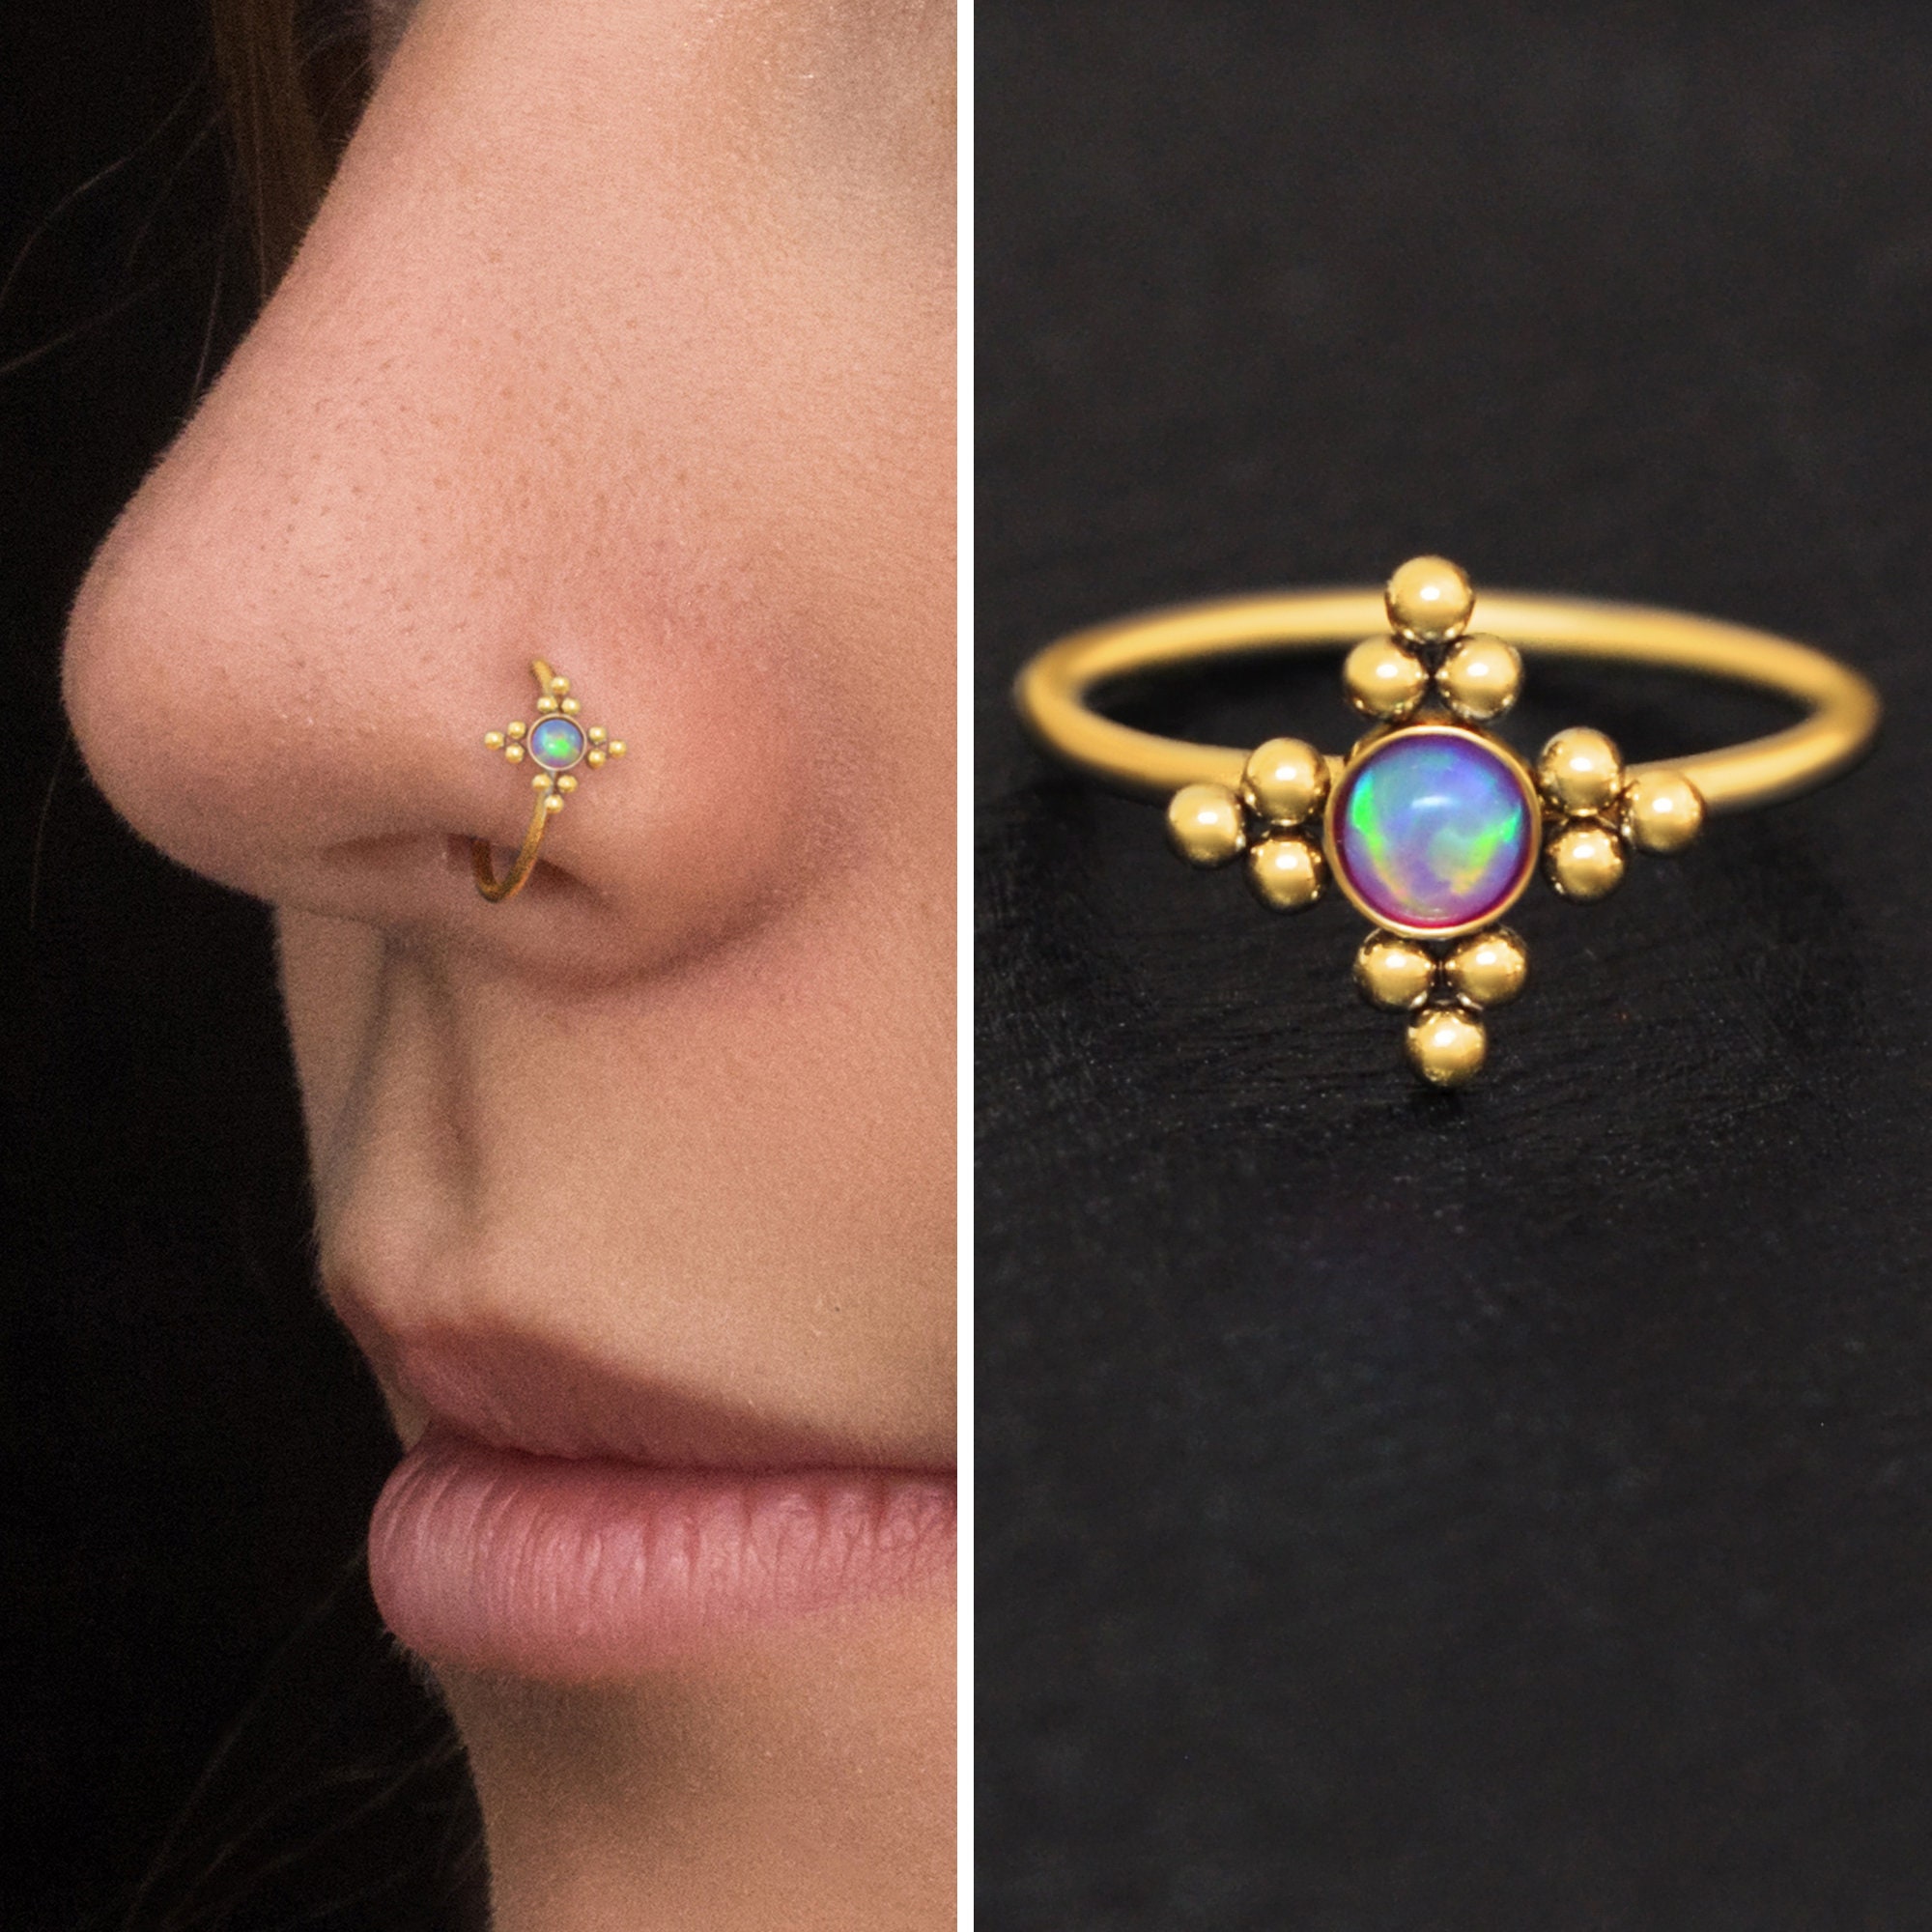 Alome Piercings Gold Nose Stud - 3mm Opal piercing nose stud 22 India | Ubuy